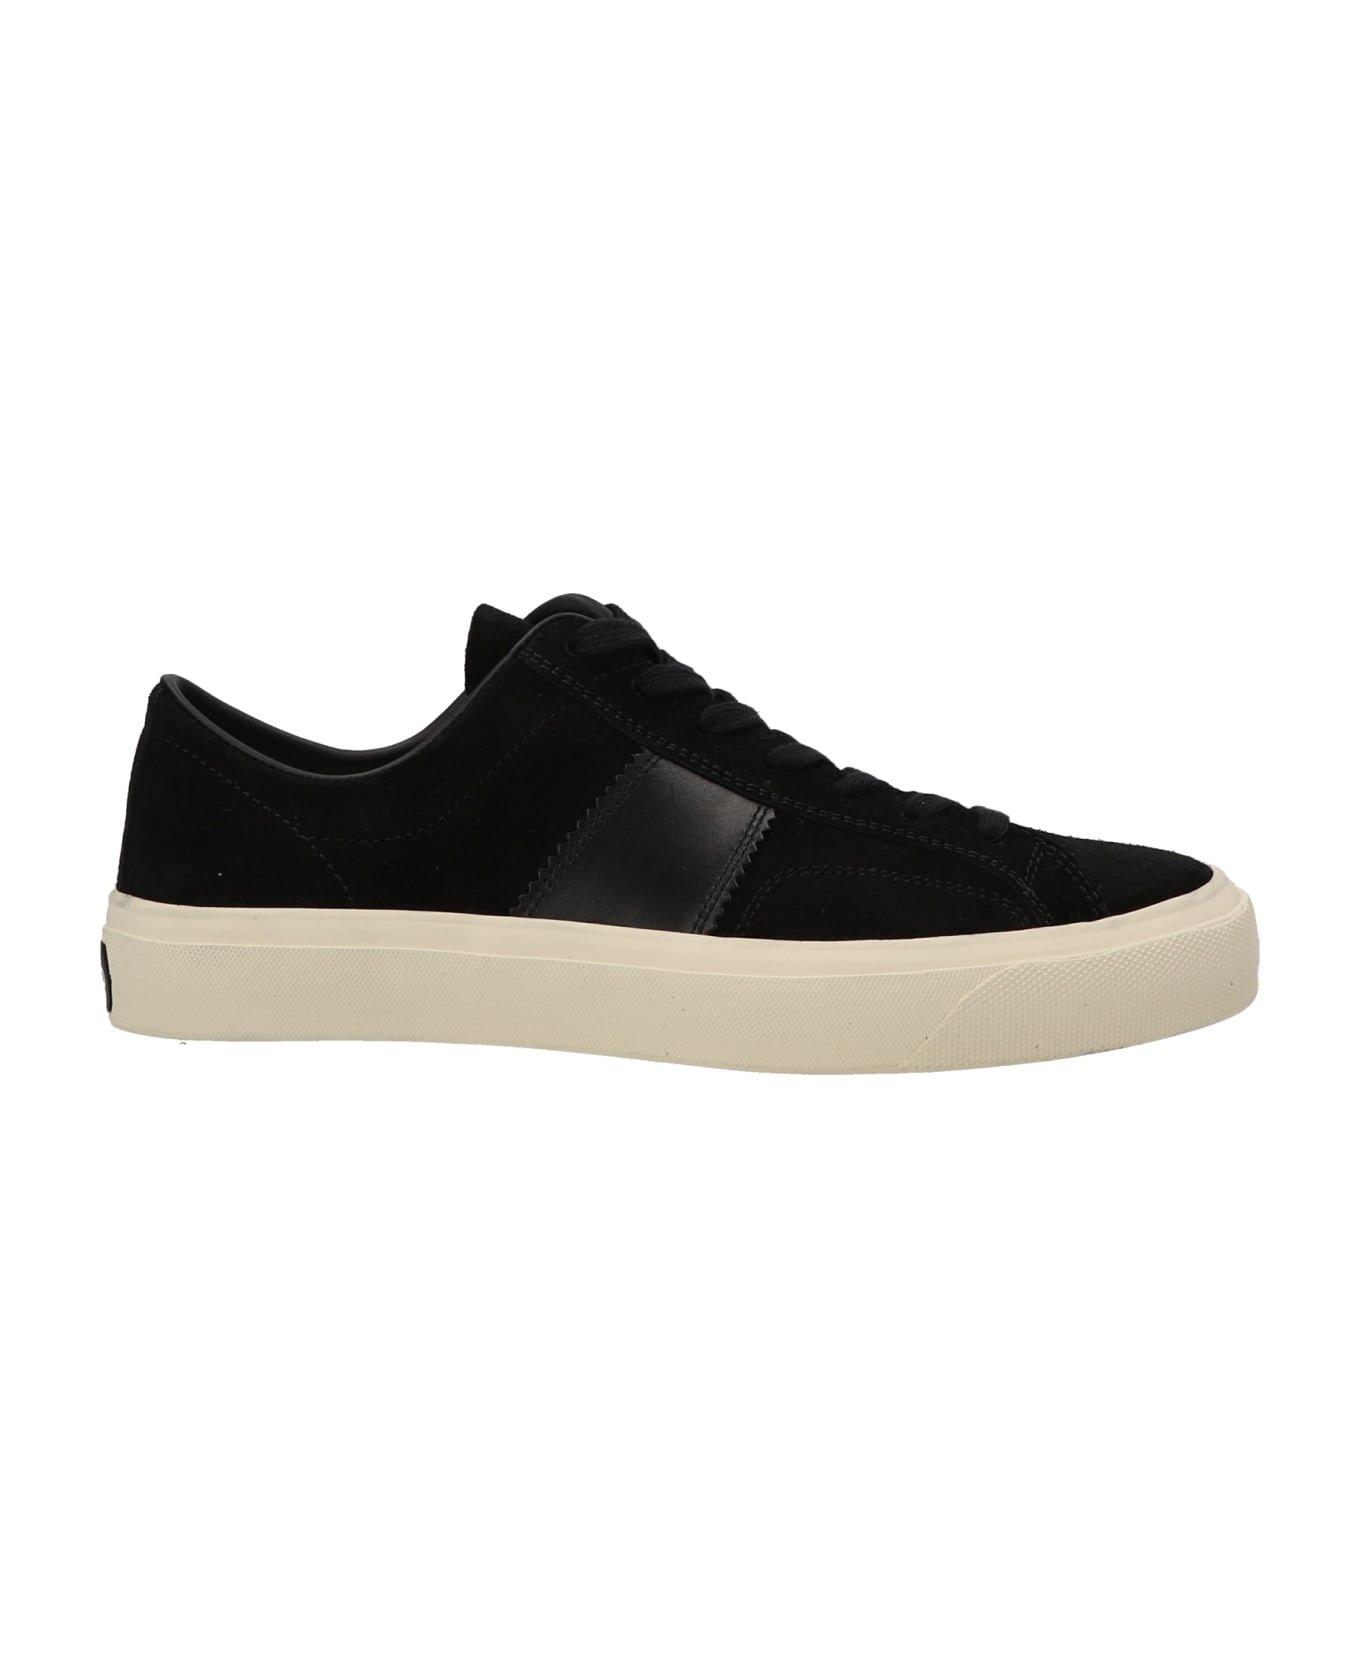 Tom Ford Suede Sneakers - White/Black